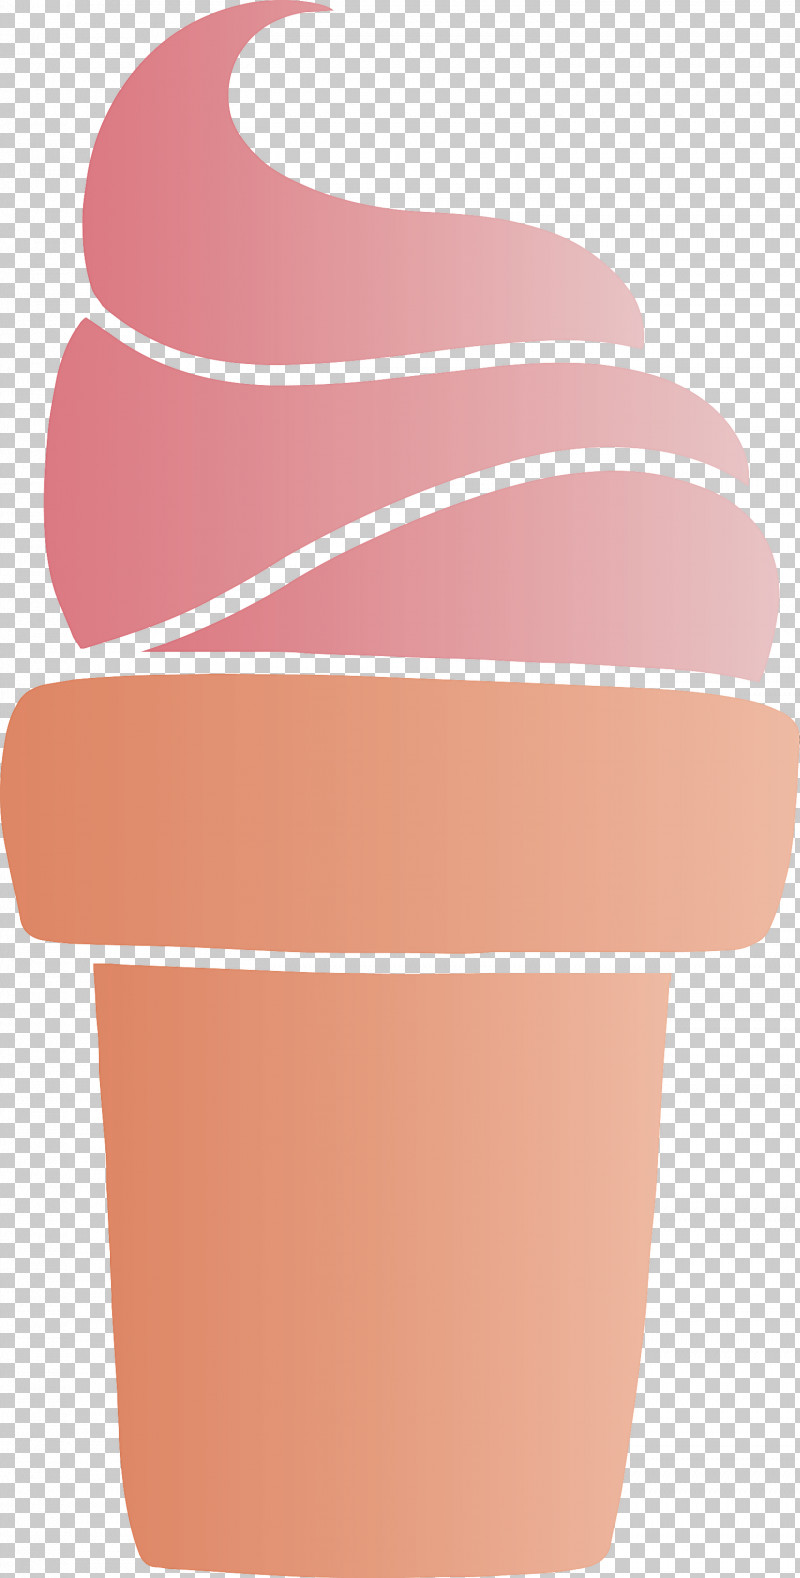 Ice Cream PNG, Clipart, Cake, Christmas Cake, Cone, Cream, Dessert Free PNG Download